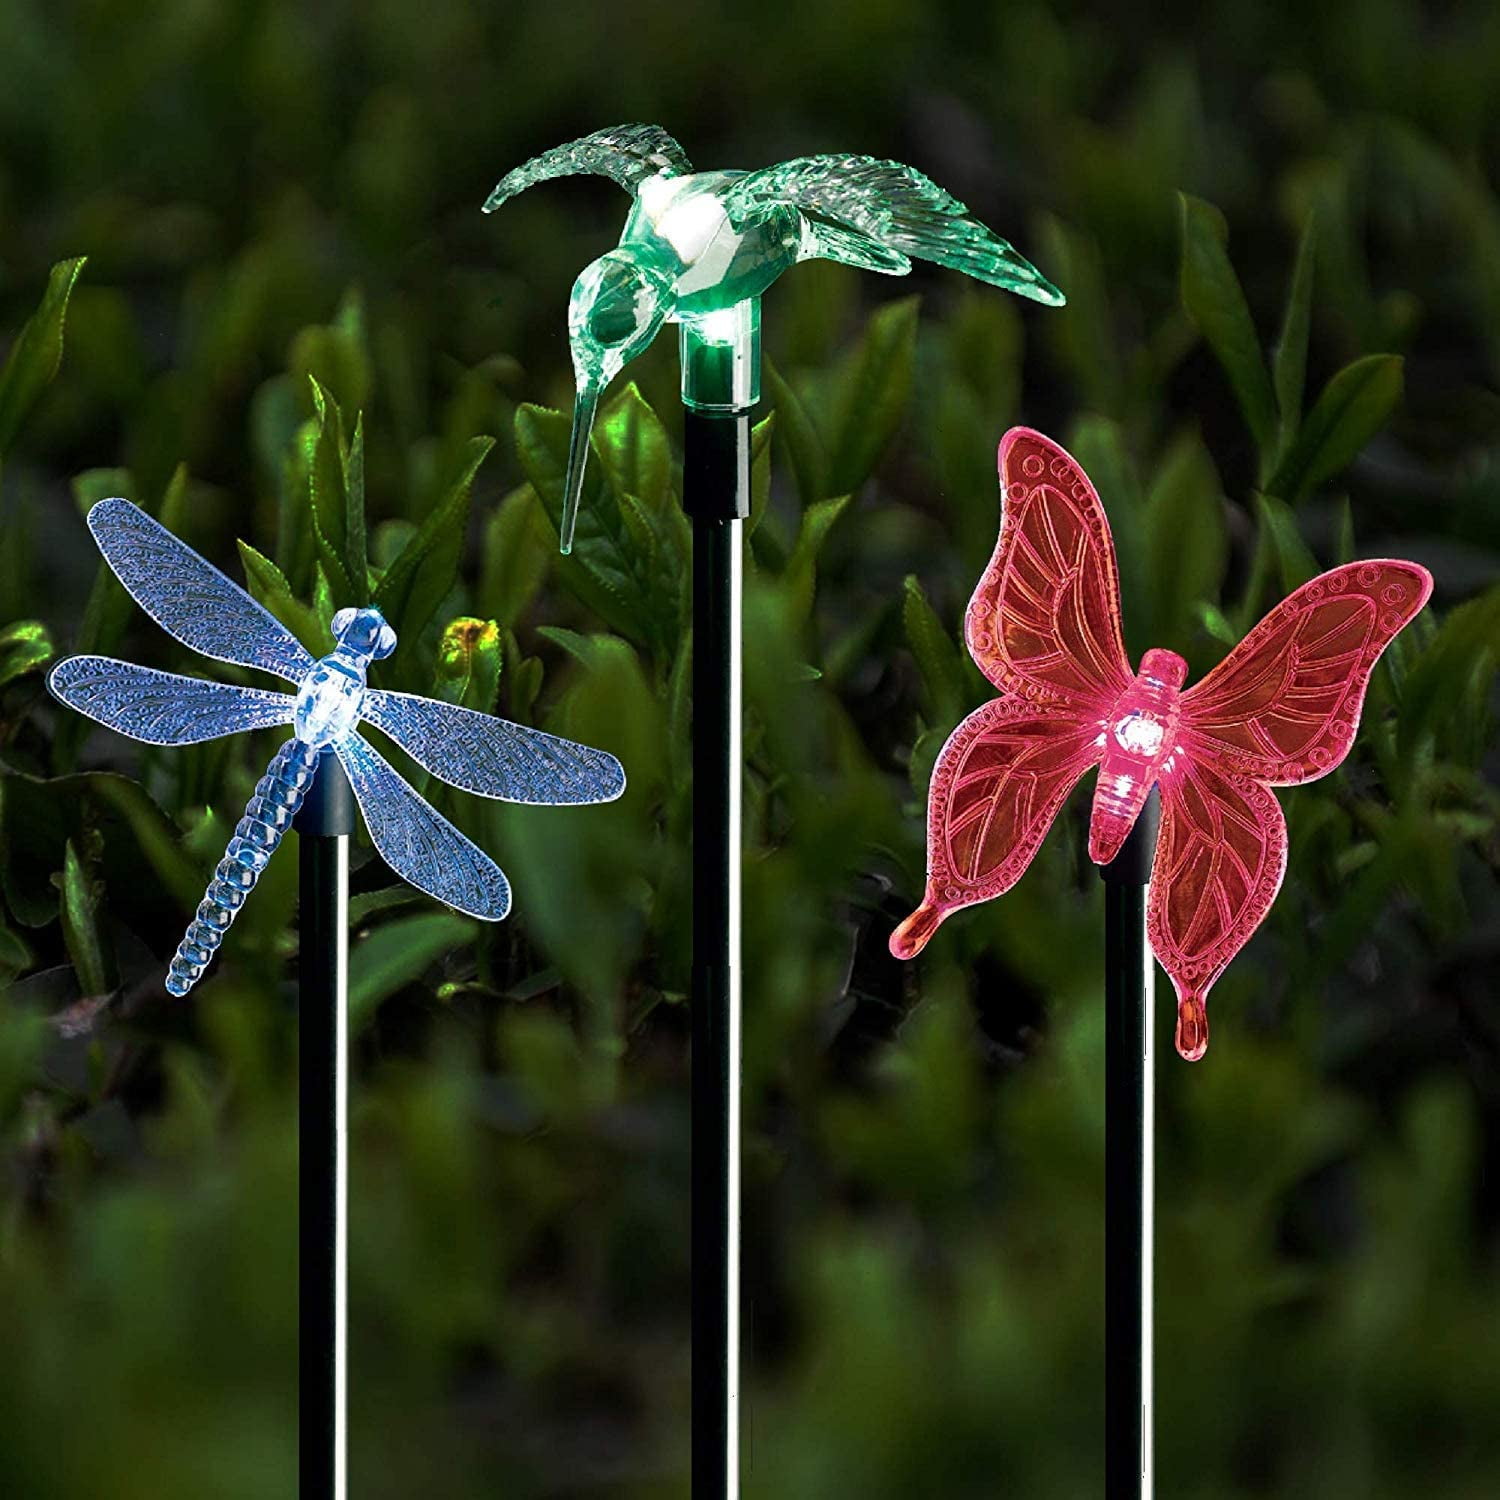 3 Sided Solar Lighted BUTTERFLY Hummingbird Yard Stake Outdoor Lawn Garden Decor 